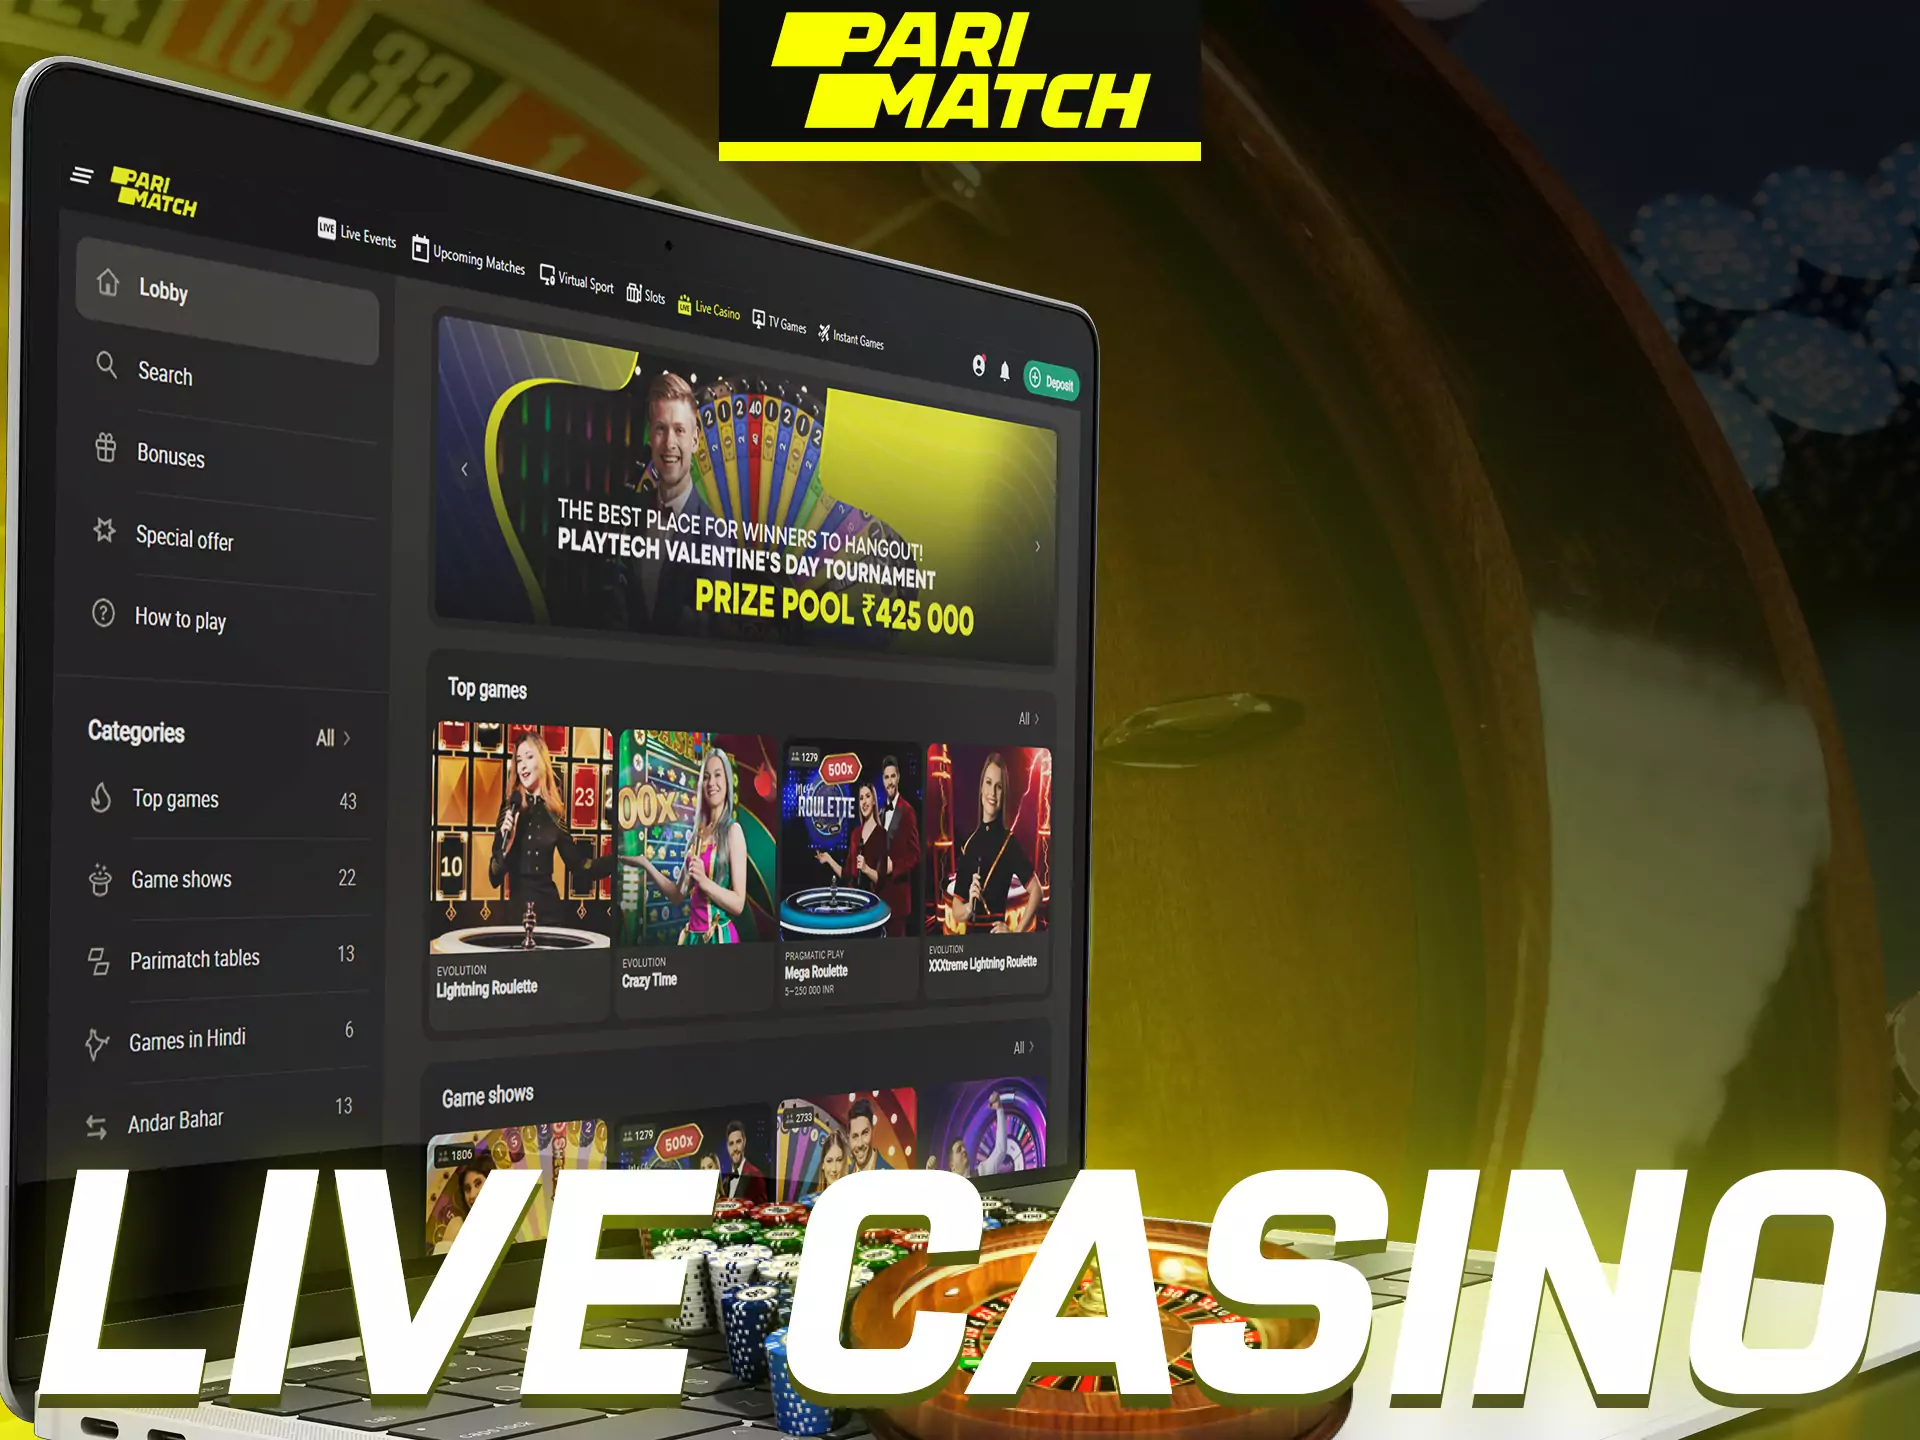 Play live casino games with real people at Parimatch.